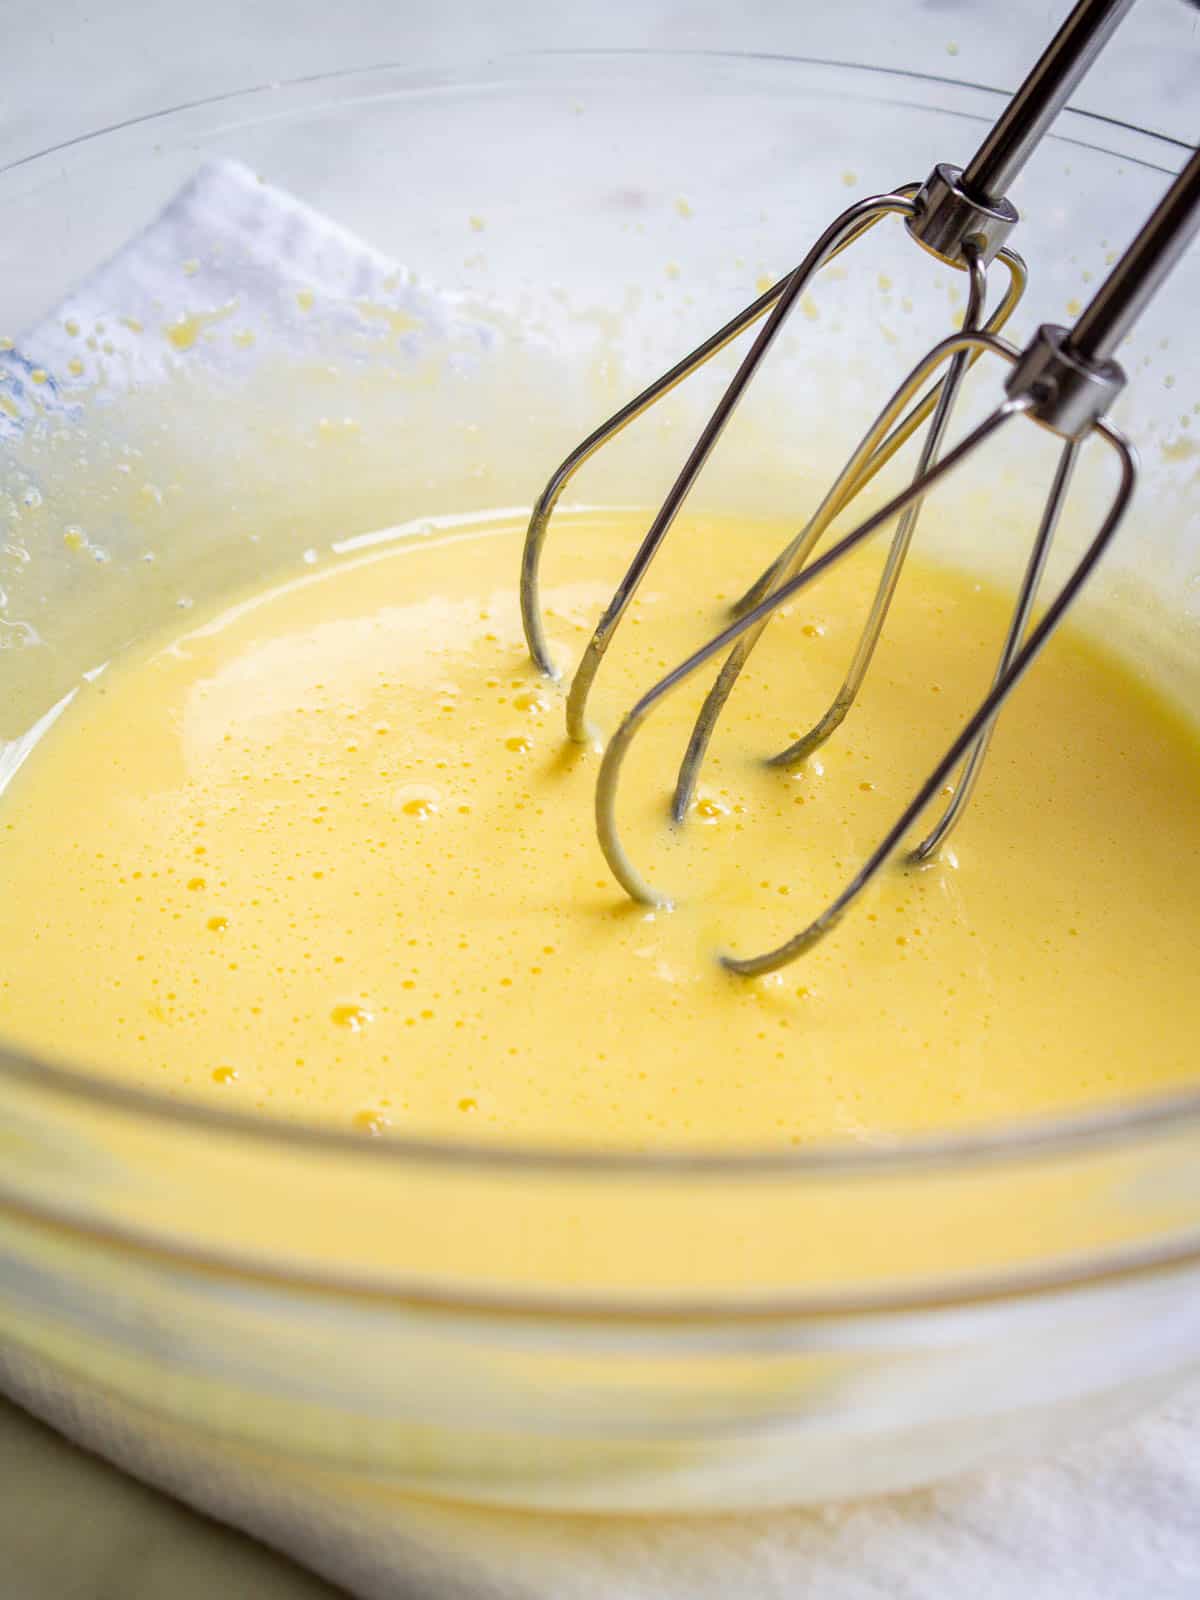 A bowlful of egg yolks and sugar that have been beaten into a pale yellow color with hand mixer whisk attachments shown.